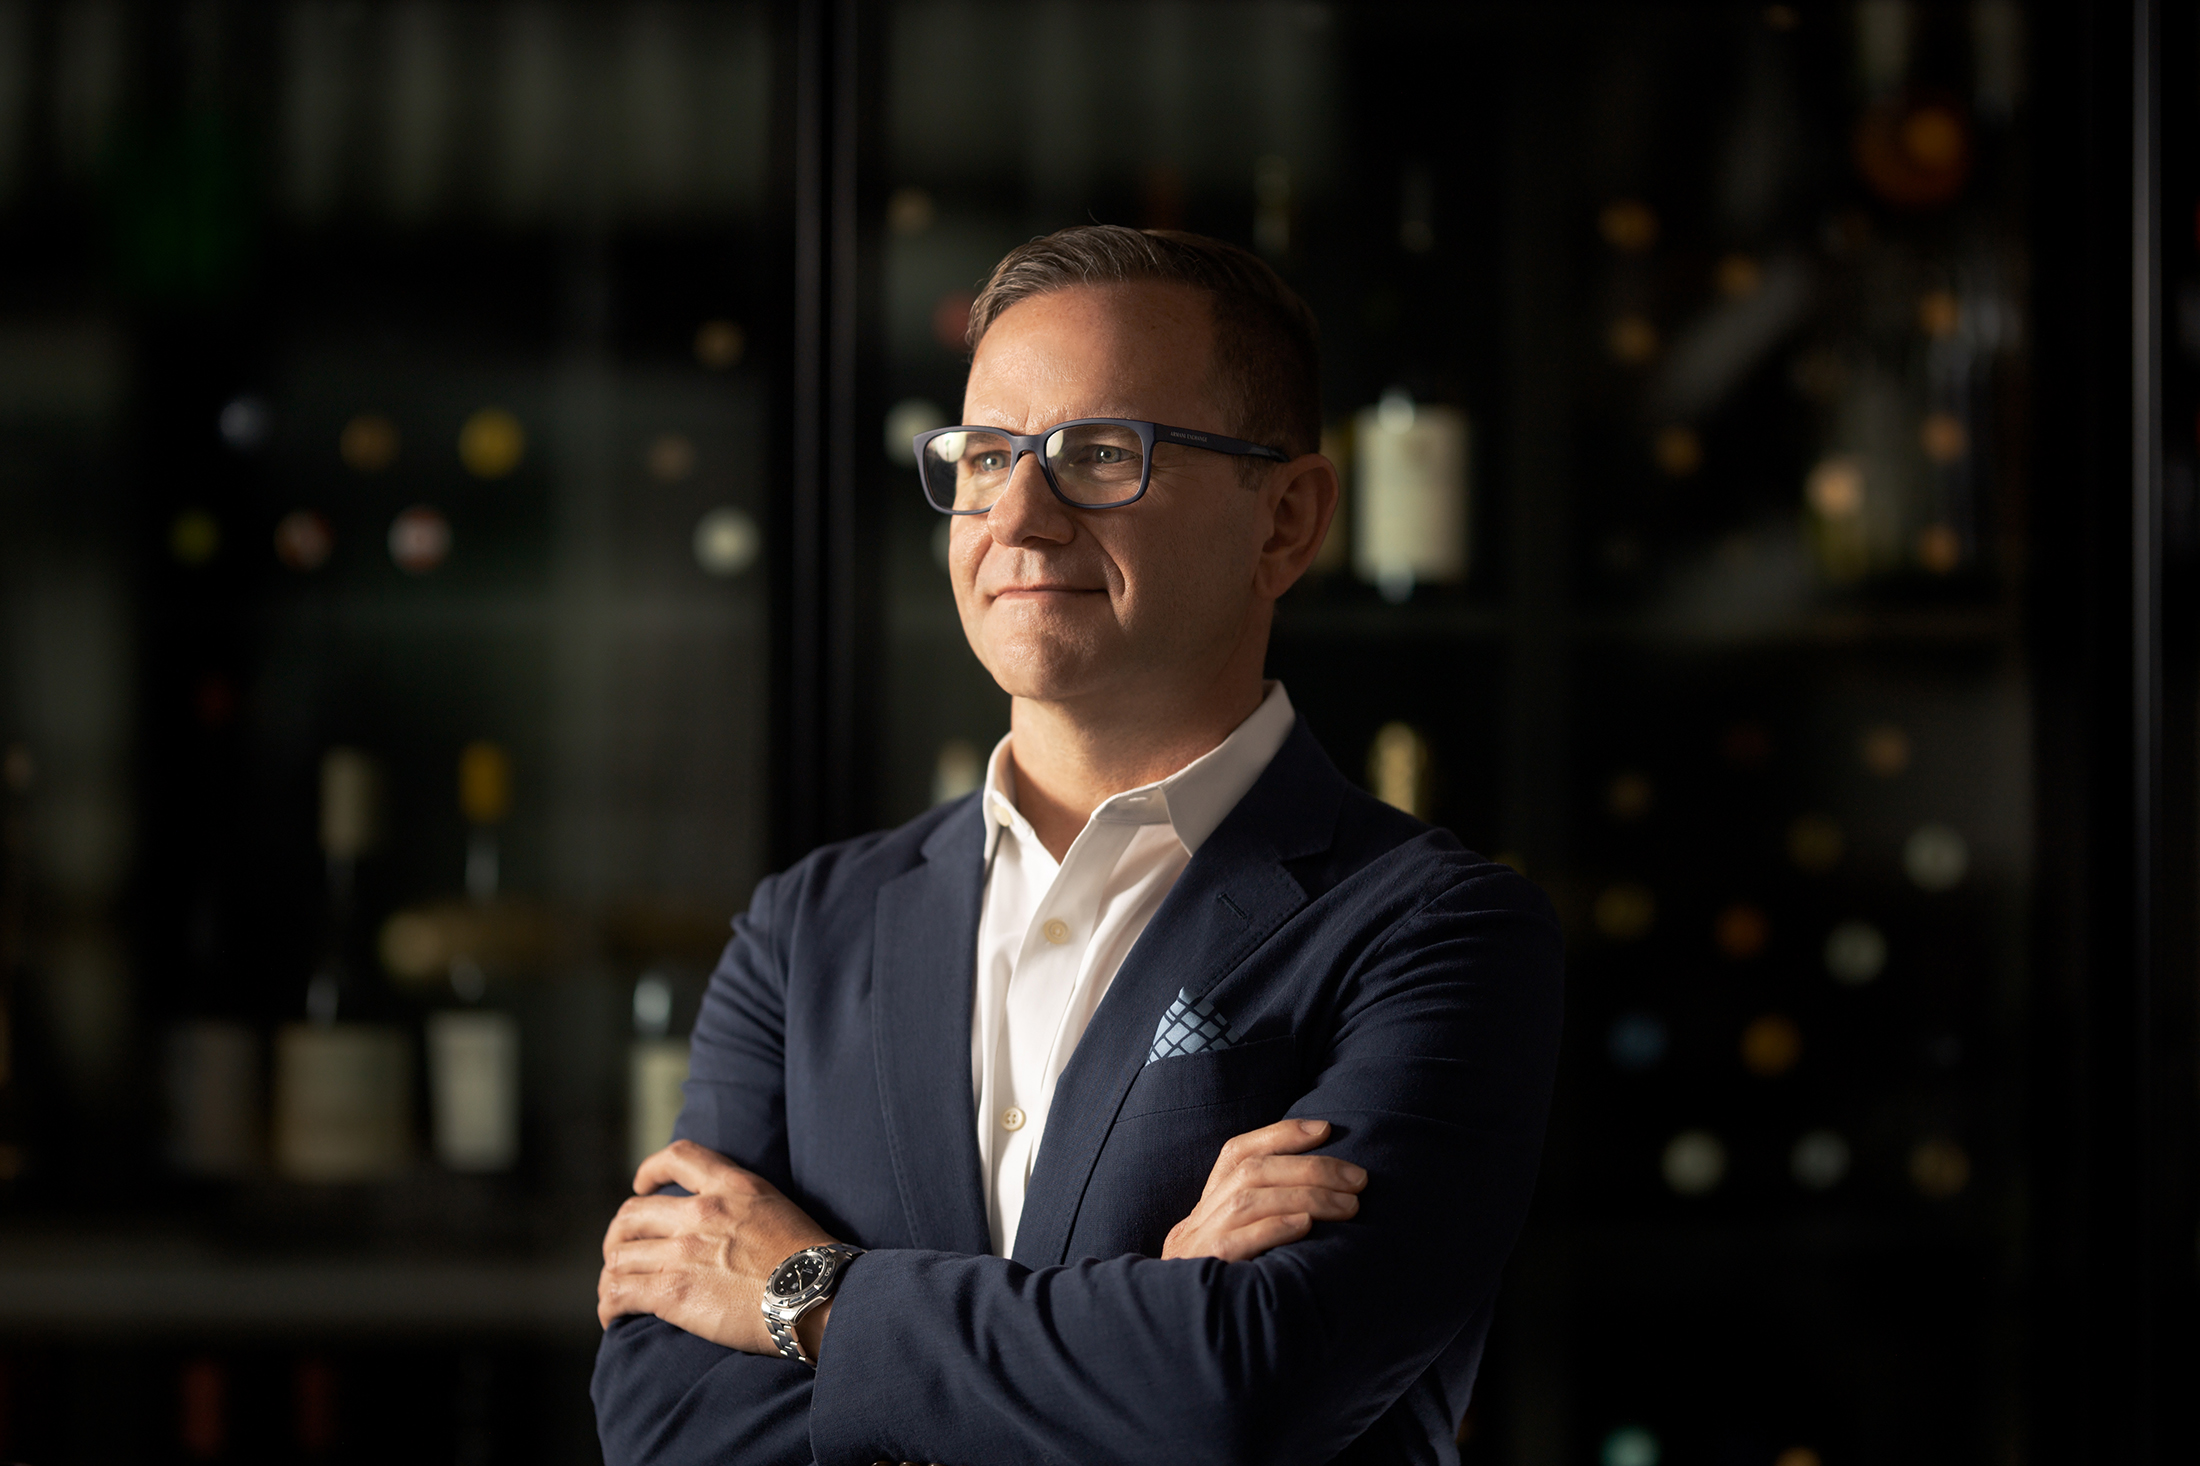 A man in glasses posing creatively among wine bottles for headshot photography.